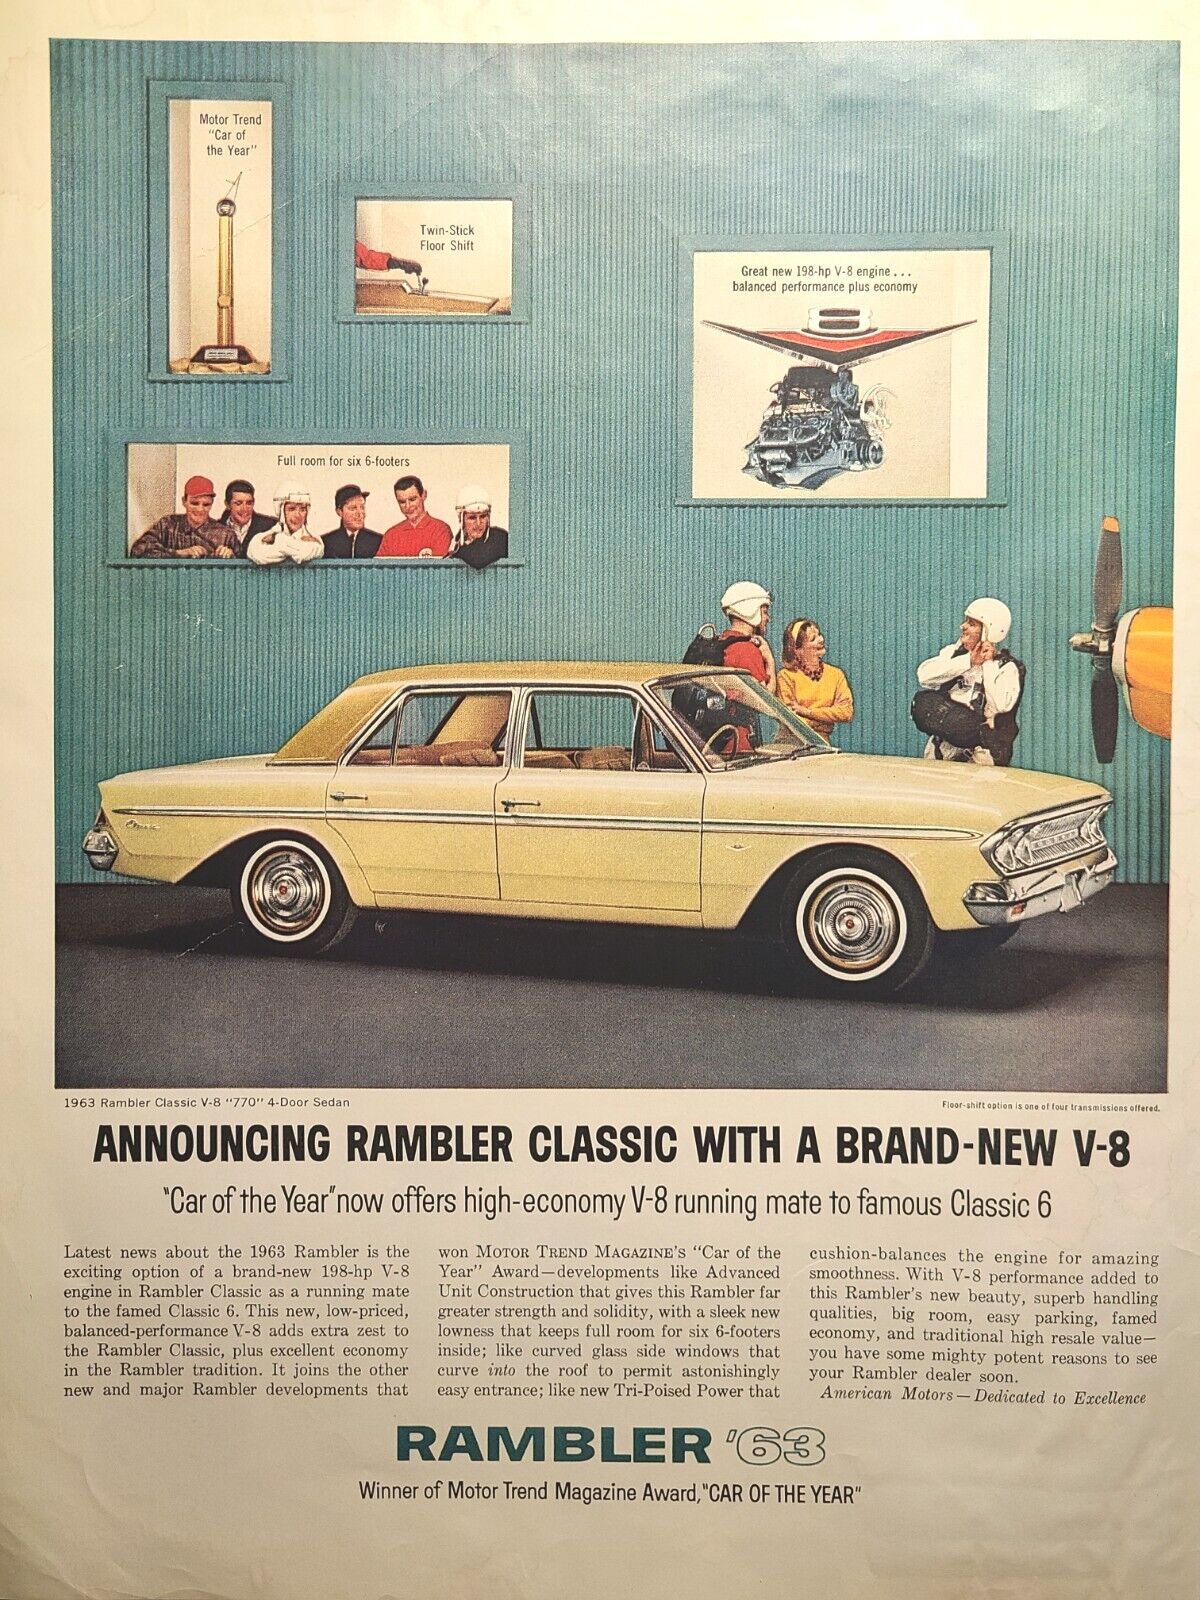 \'63 Rambler Classic New V-8 Motor Trend Car of the Year Vintage Print Ad 1963